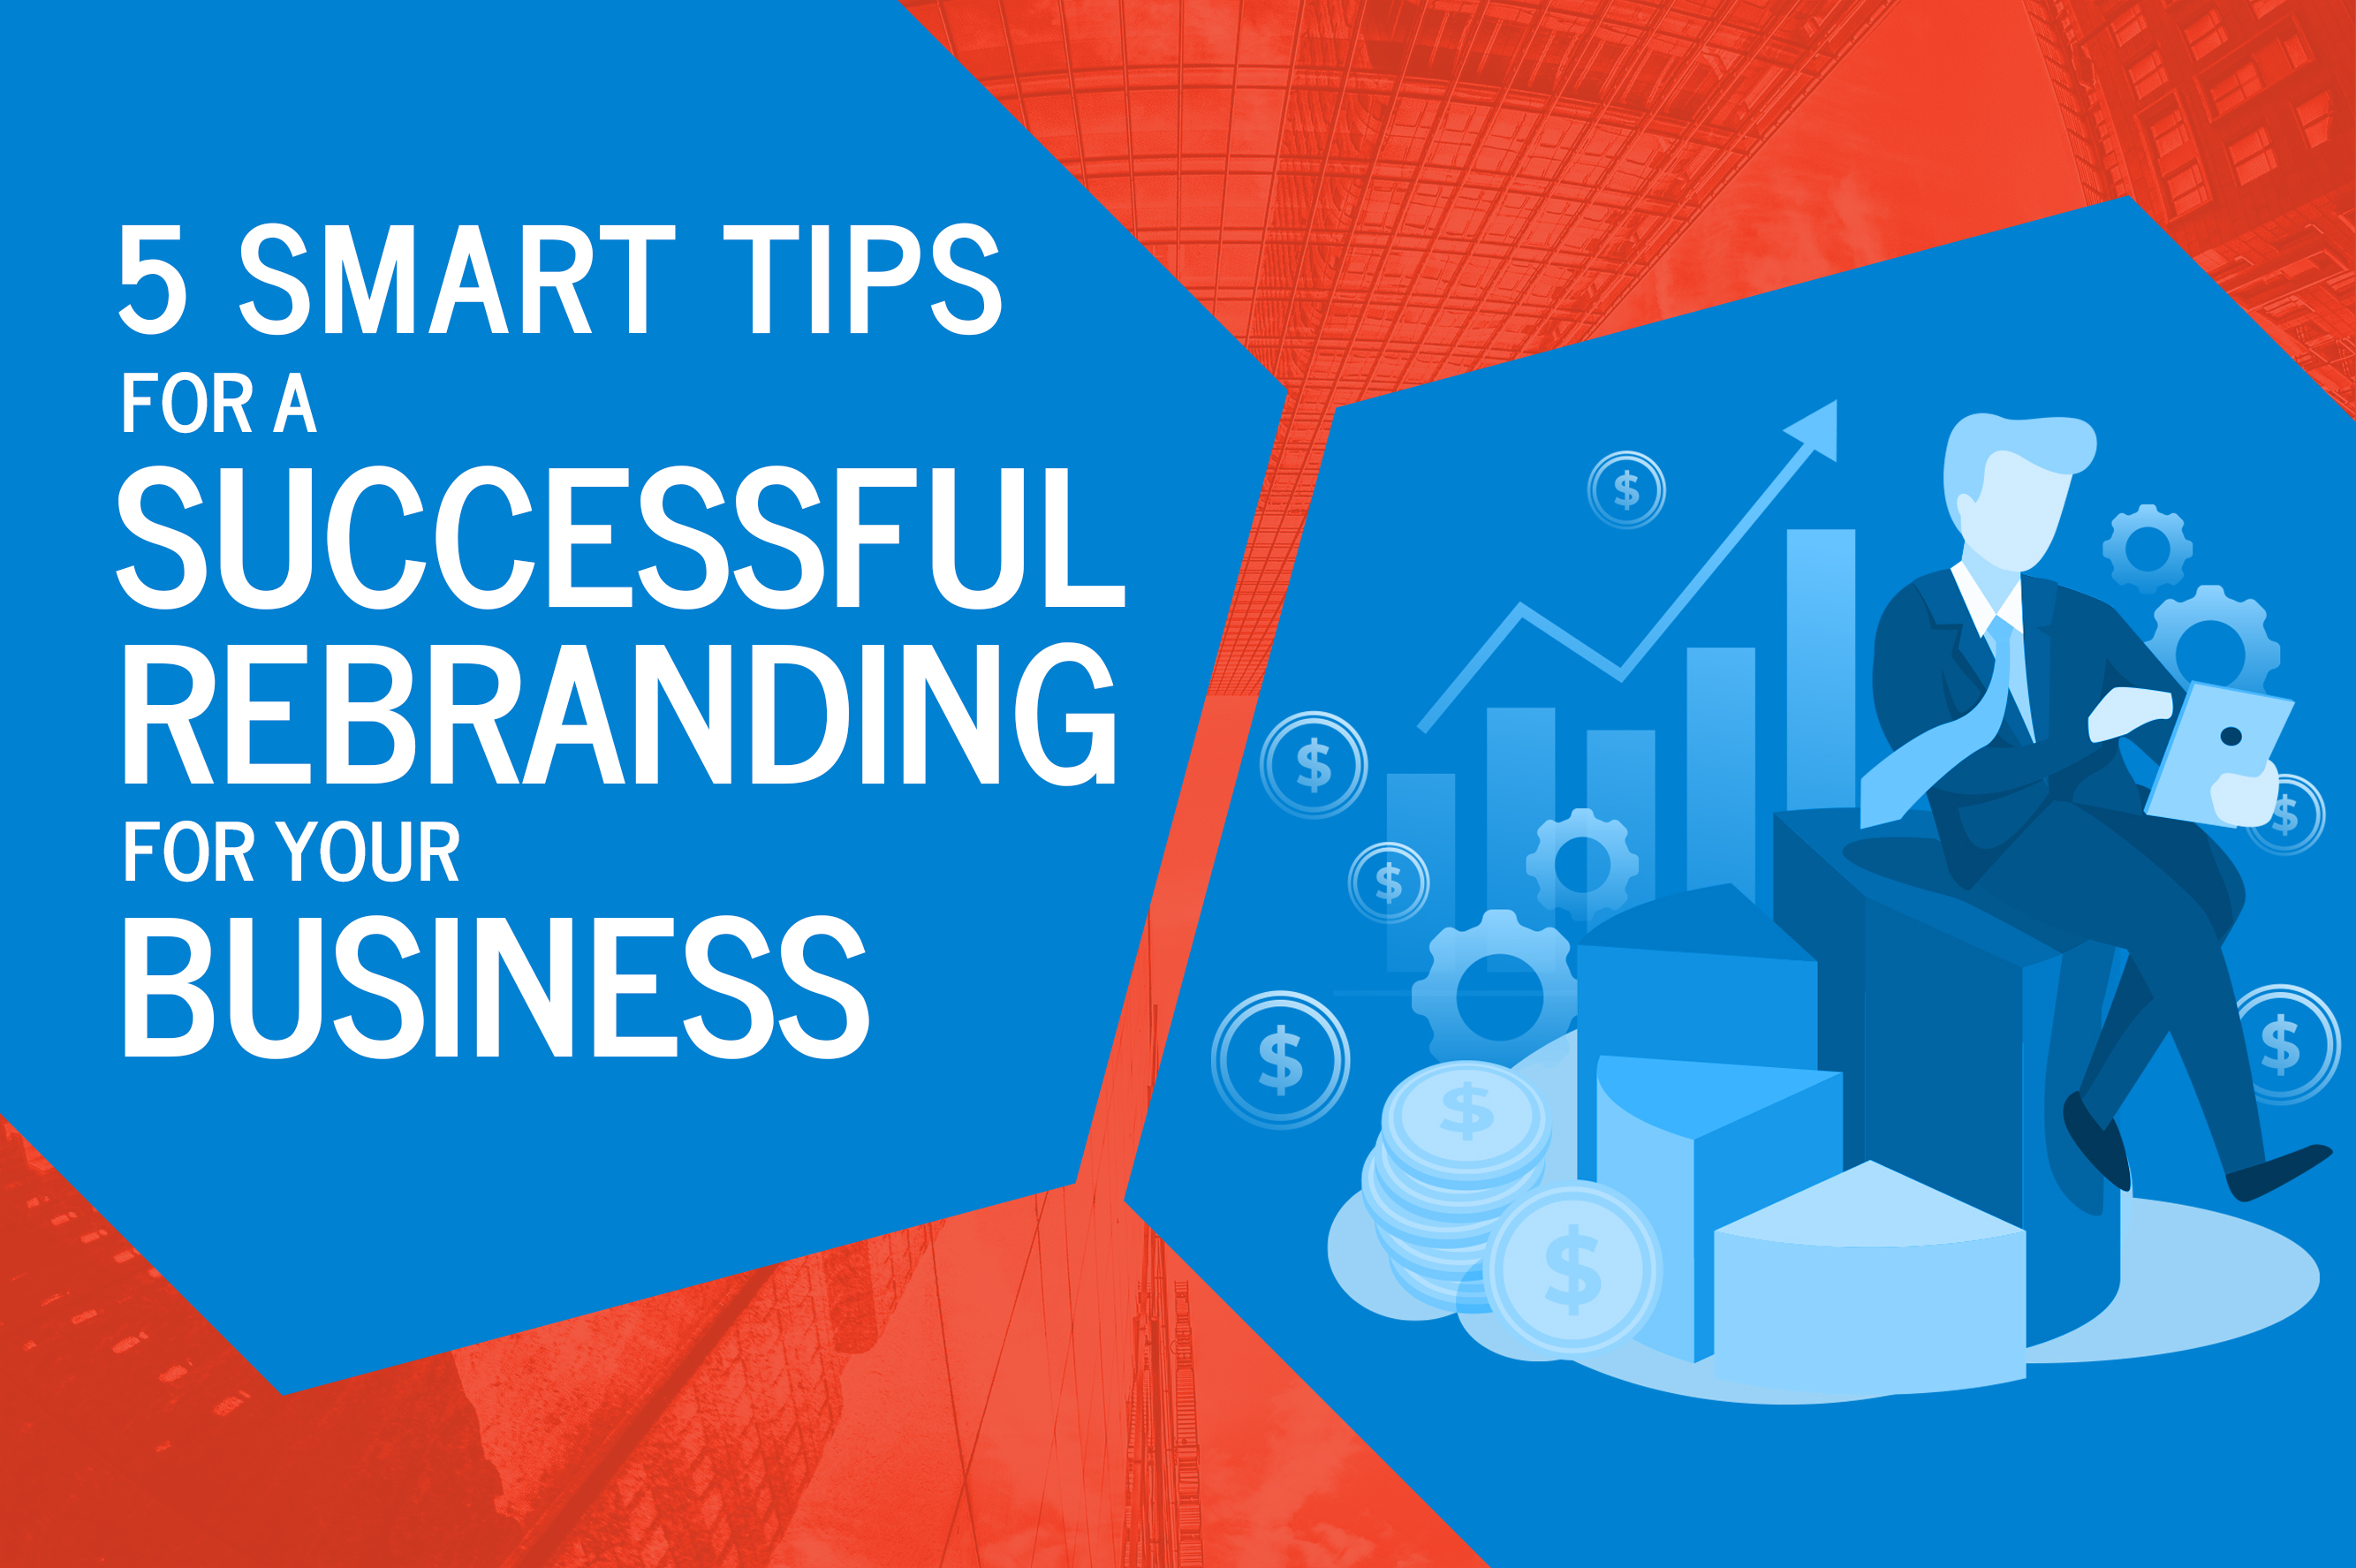 5 Smart Tips for a Successful Rebranding for Your Business